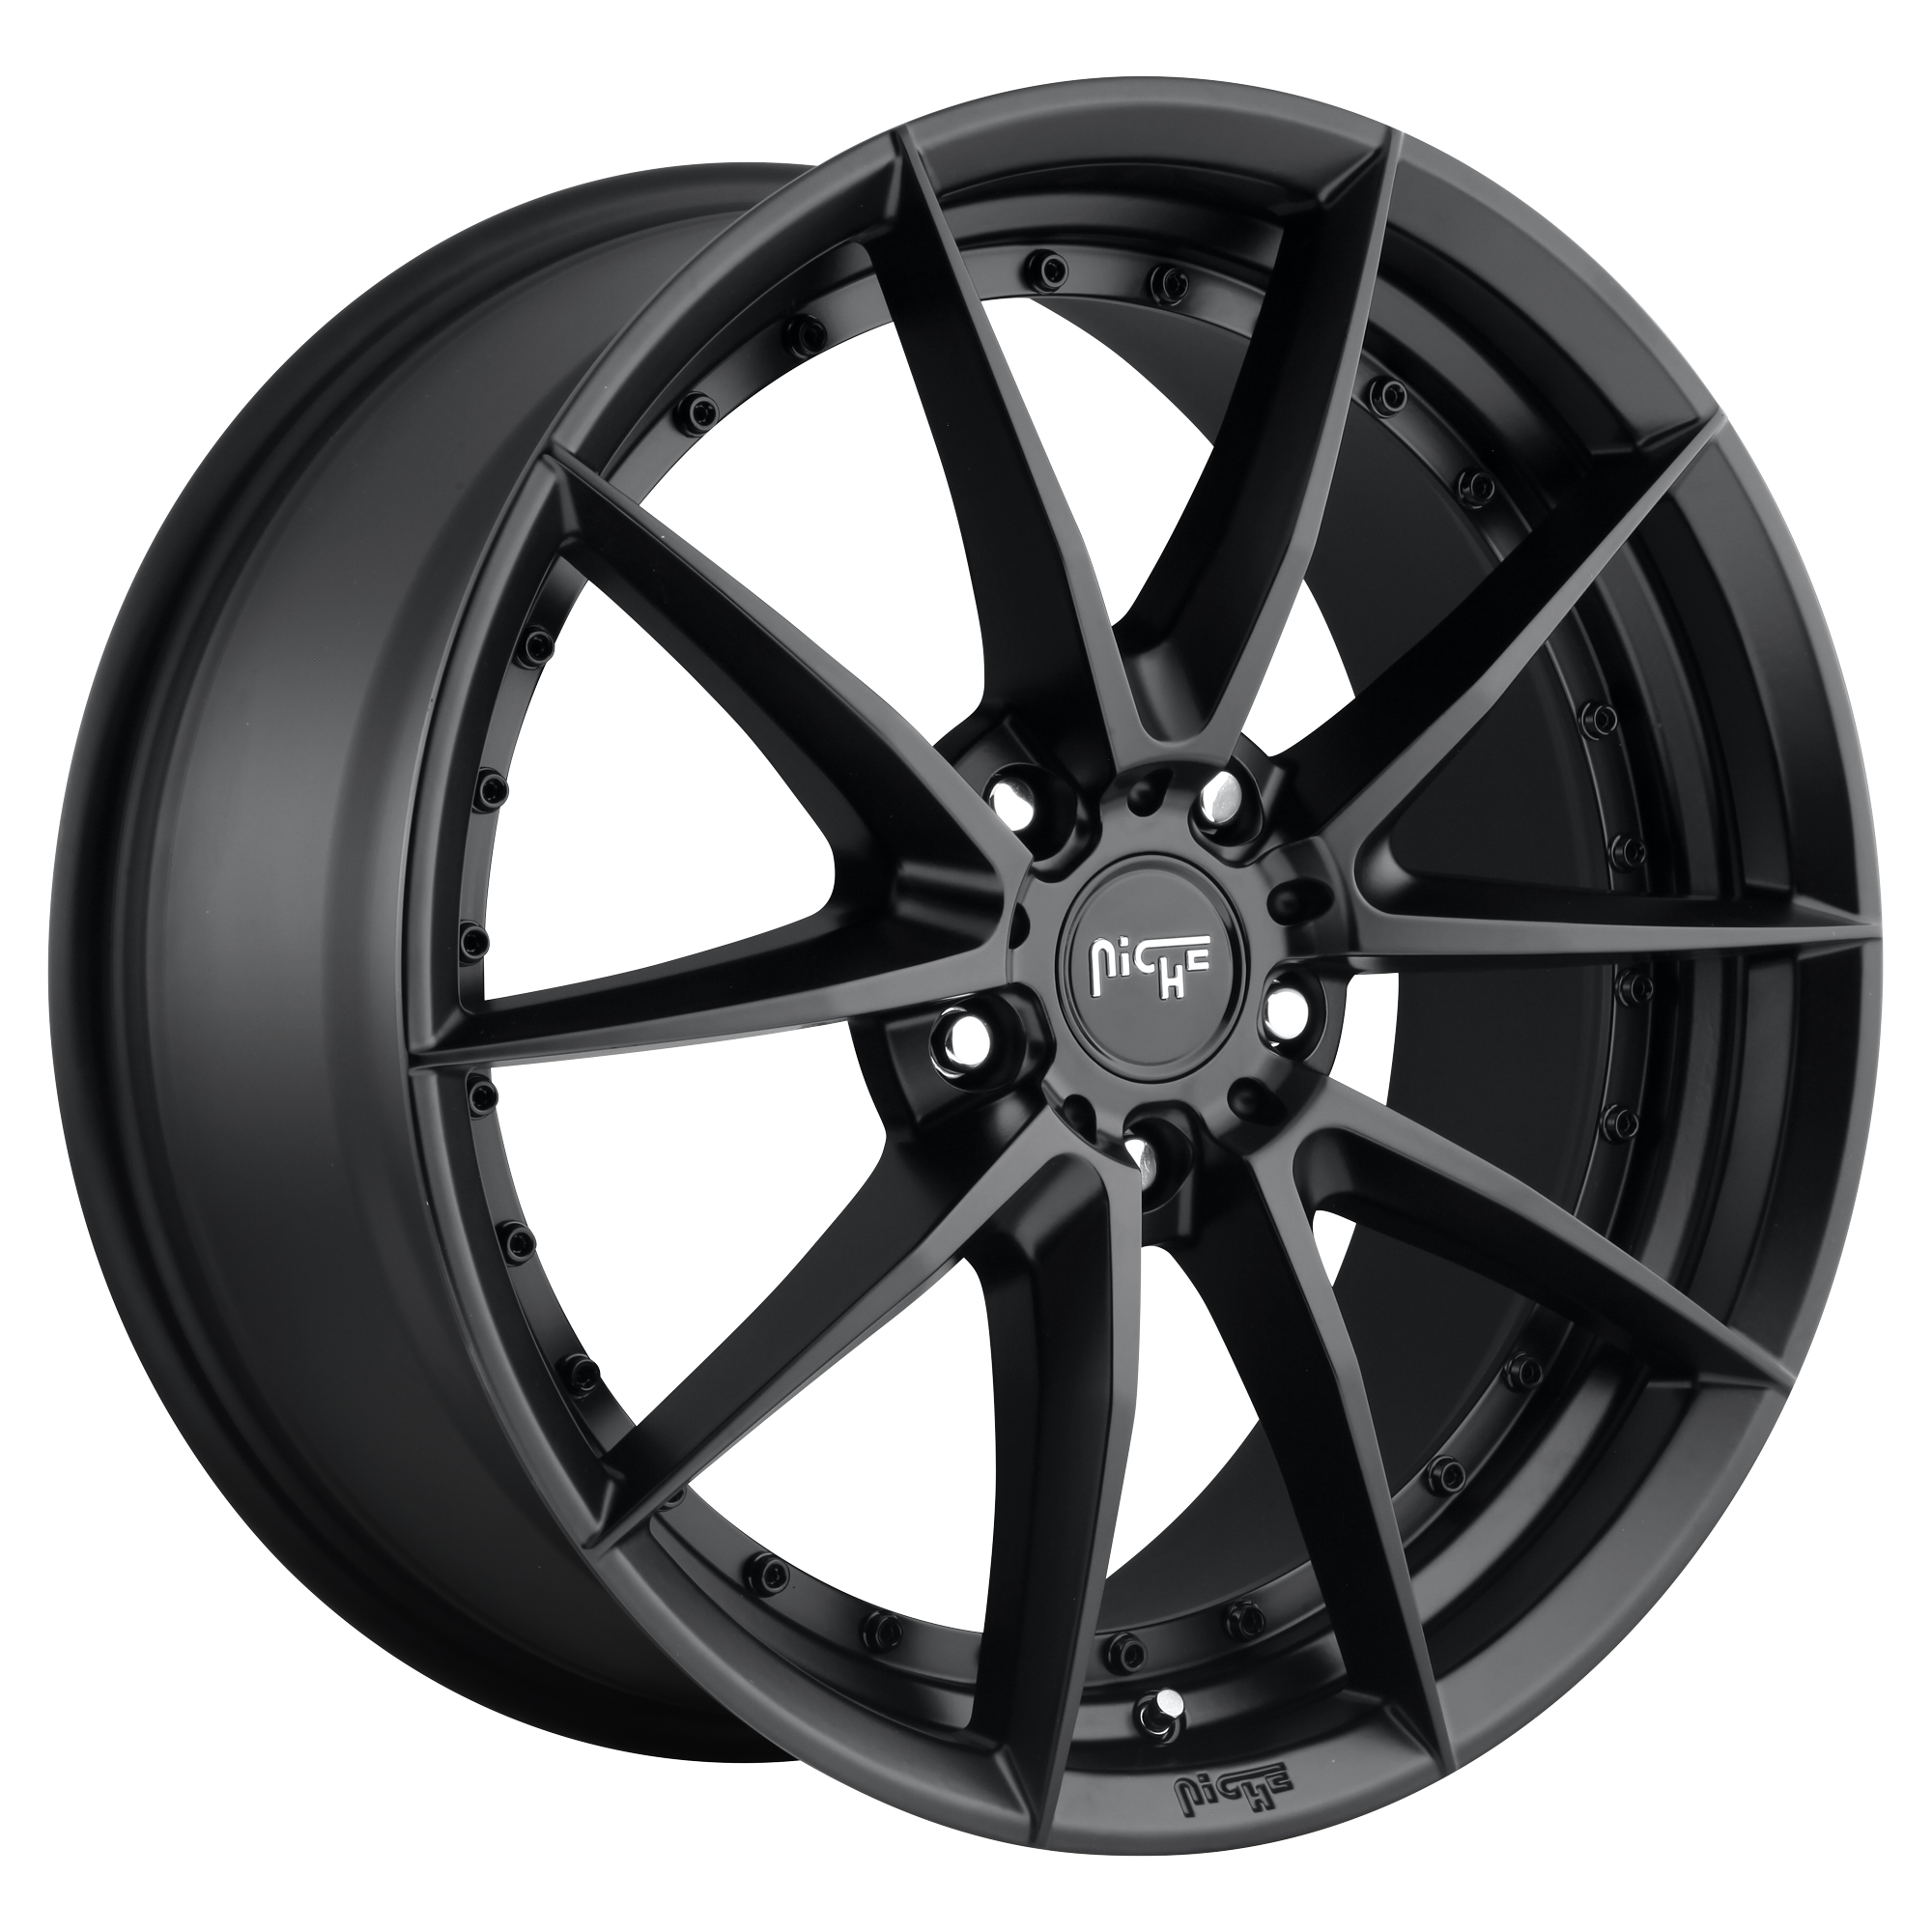 SECTOR 19x8.5 5x112.00 MATTE BLACK (42 mm) - Tires and Engine Performance